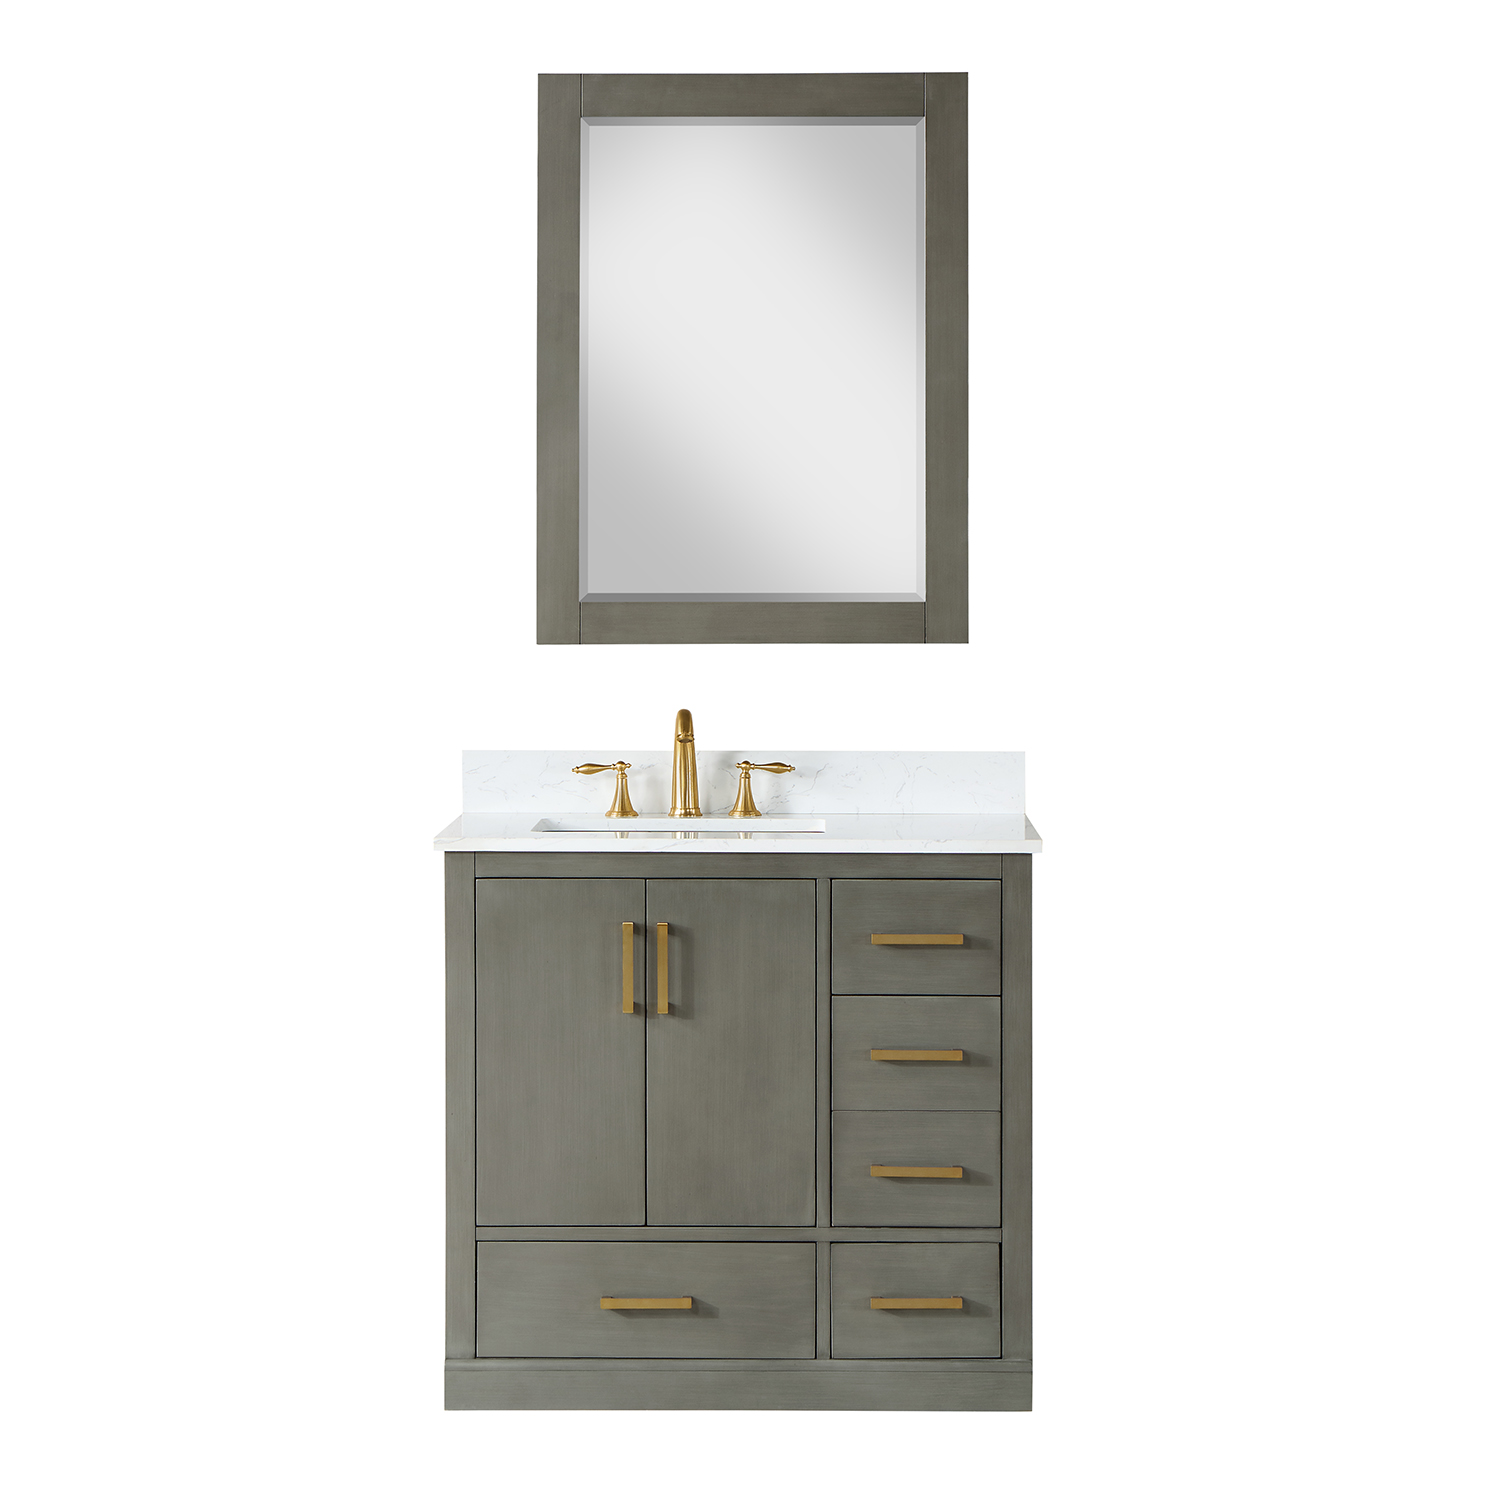 Issac Edwards Collection 36" Single Bathroom Vanity Set in Gray Pine with Carrara White Composite Stone Countertop with Mirror 